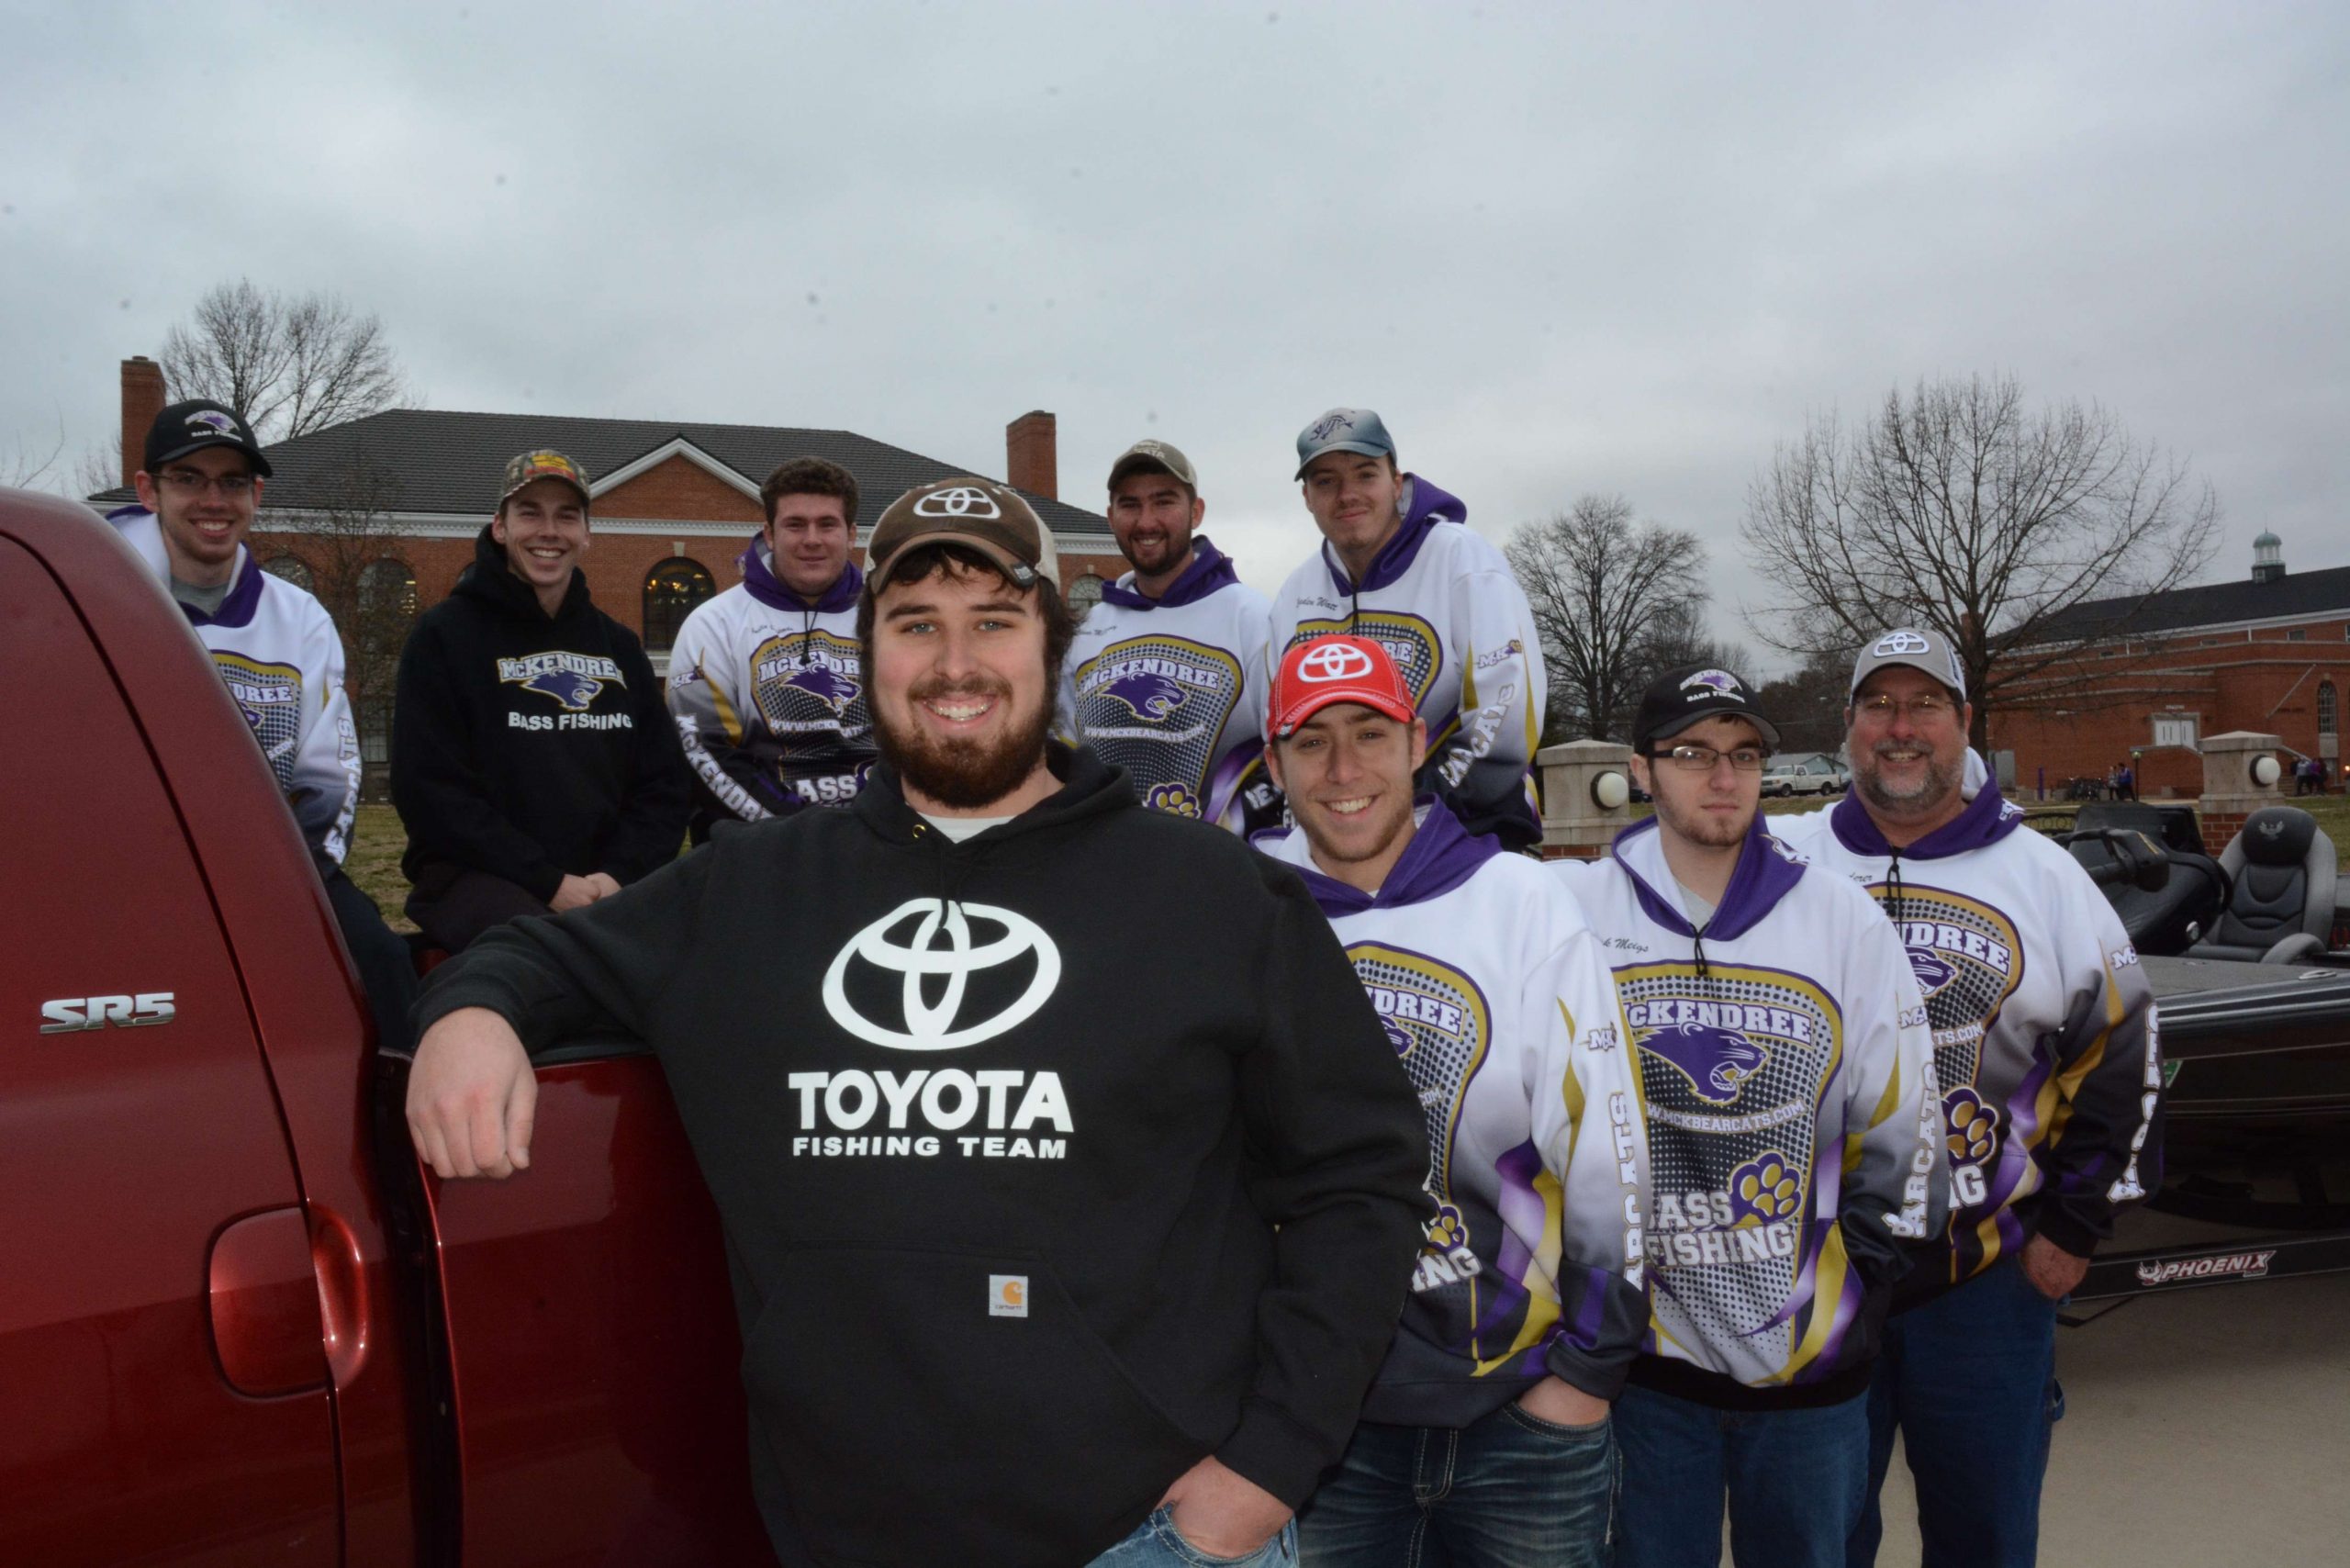 The McKendree University Bass Fishing Team came together in 2013, and Austin Chapman often fills his Tundra with his teammates to go to tournaments or to the grocery store. âThereâs a lot of stories that have been told in this truck going to and from tournaments. I canât tell how many hours Iâve spent in this truck driving to and from tournaments with my partners.â
